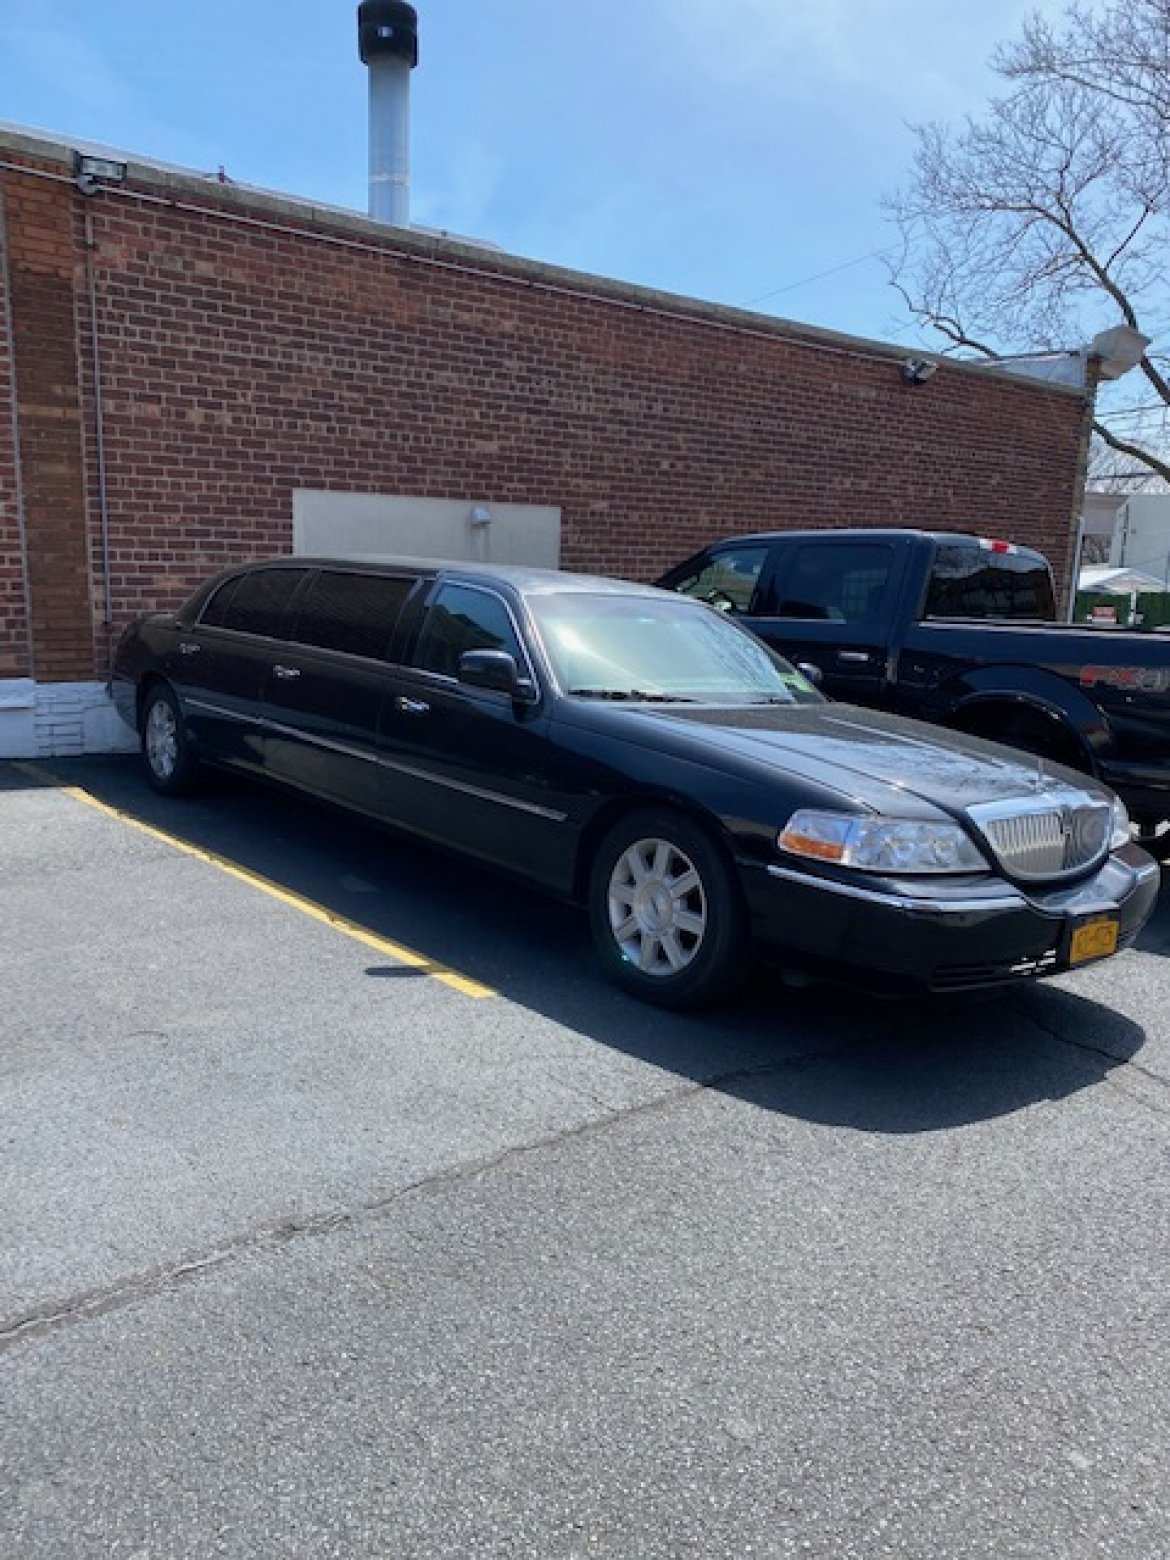 Limousine for sale: 2010 Lincoln Town Car by Superior